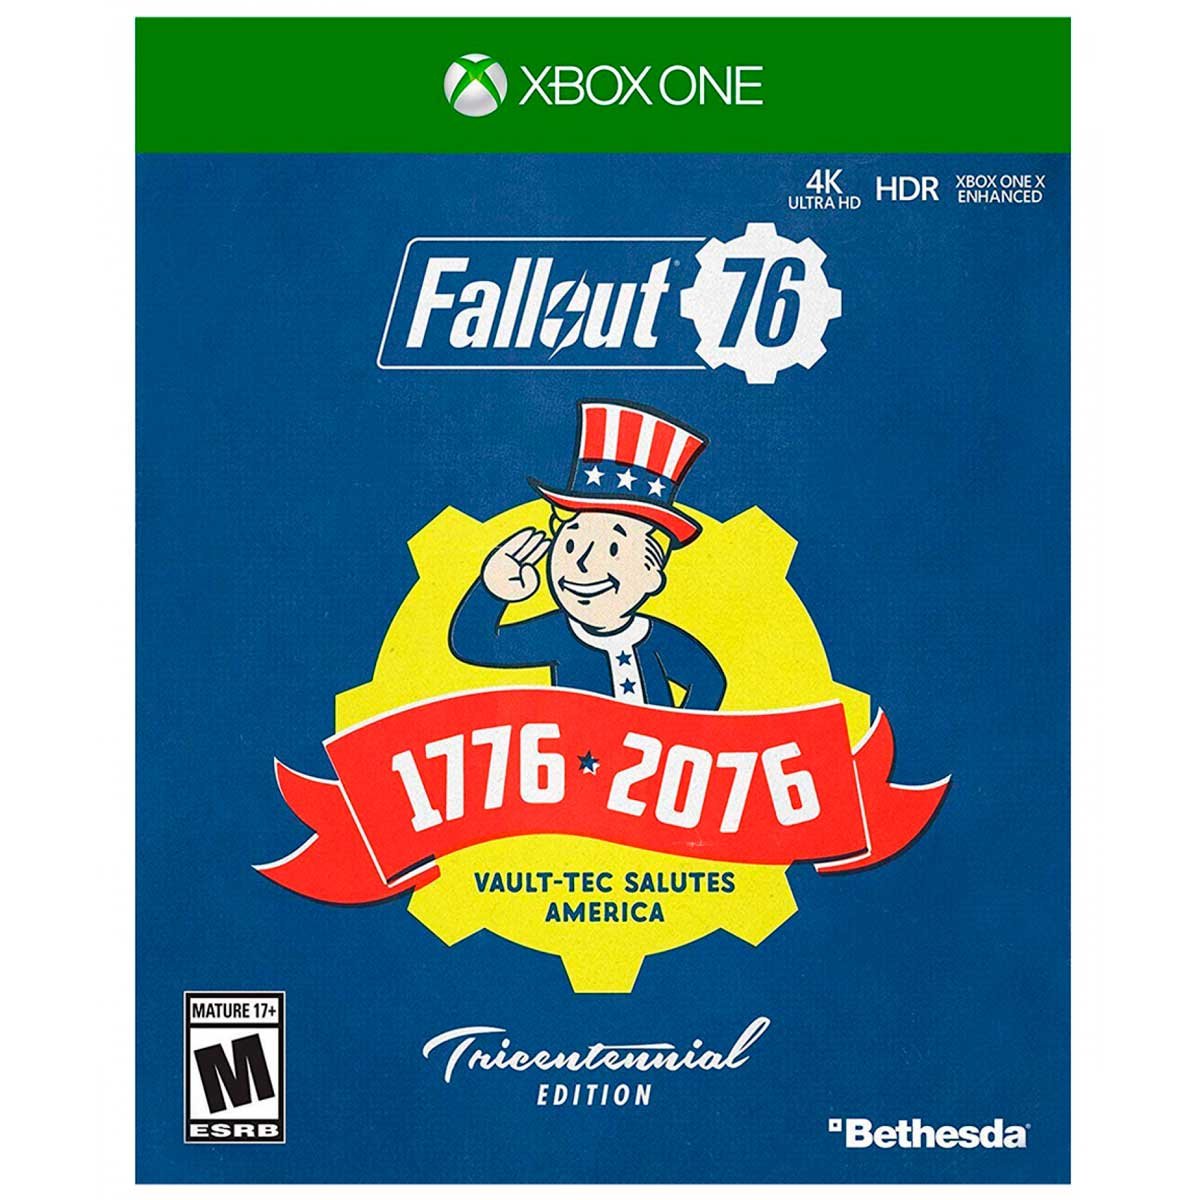 Xbox One  Fall  Out 76 Tricentennial Edition